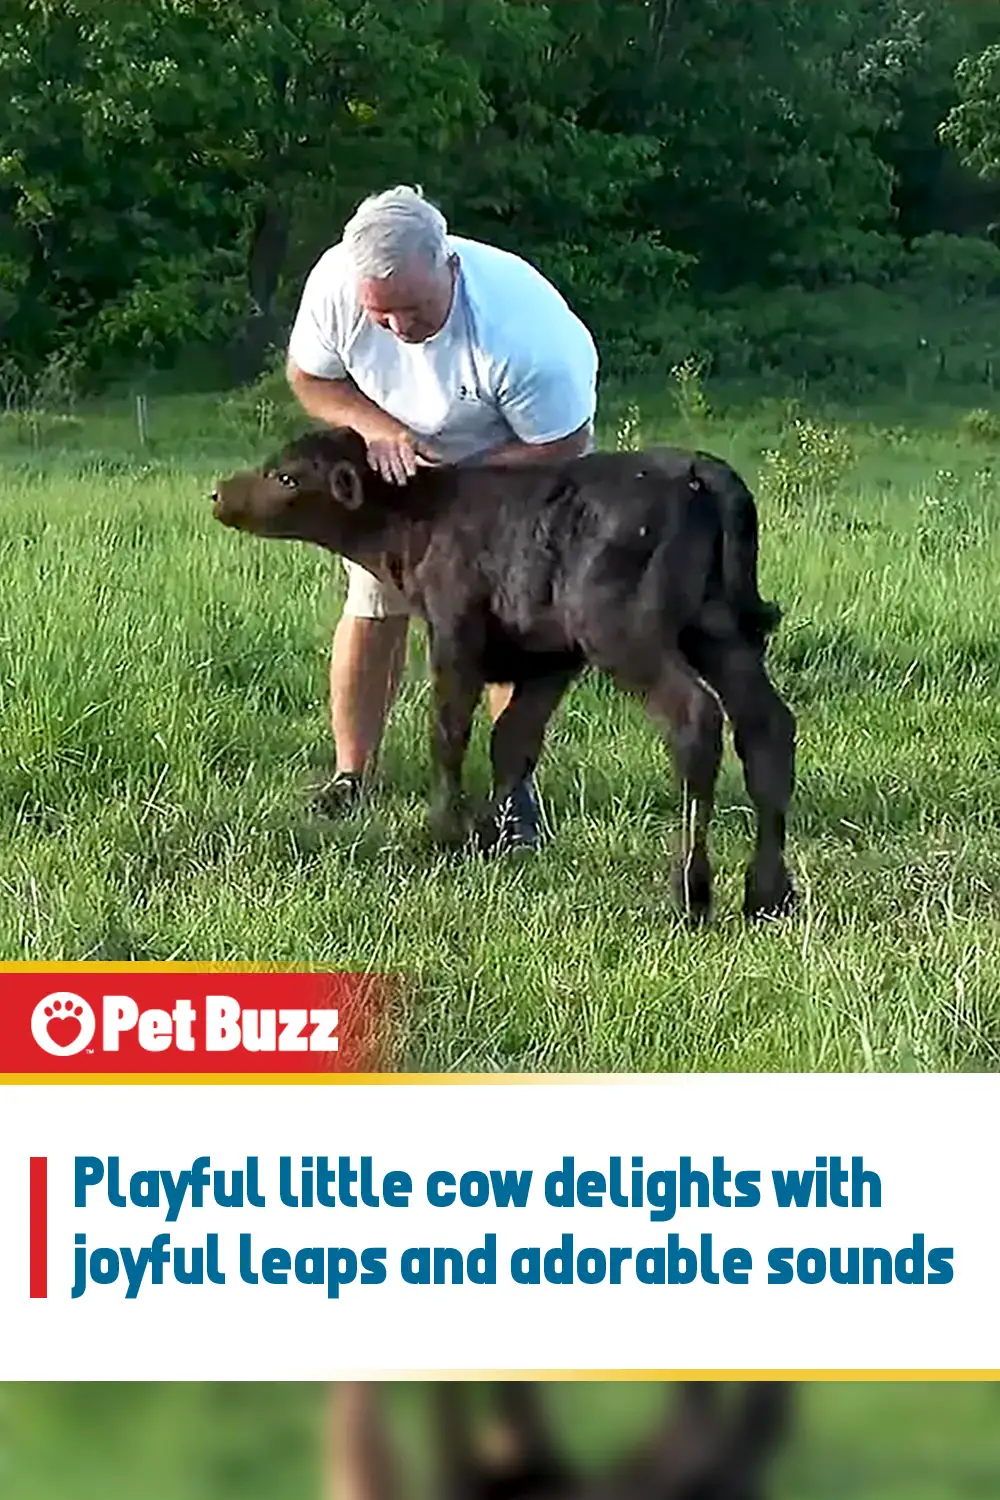 Playful little cow delights with joyful leaps and adorable sounds